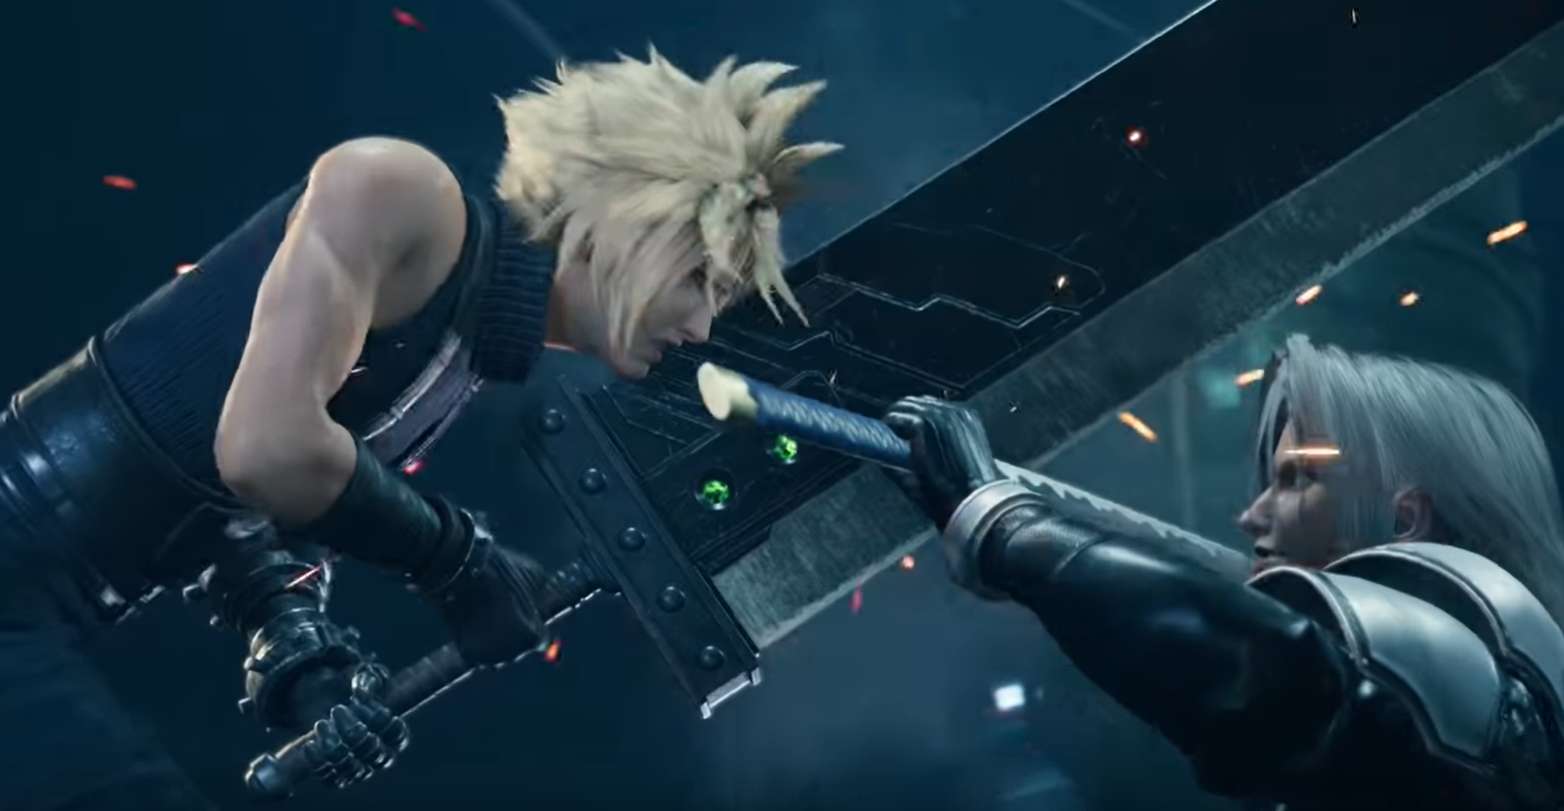 Making Sense Out Of The Ending Of Final Fantasy 7 Remake – What Actually Happened?